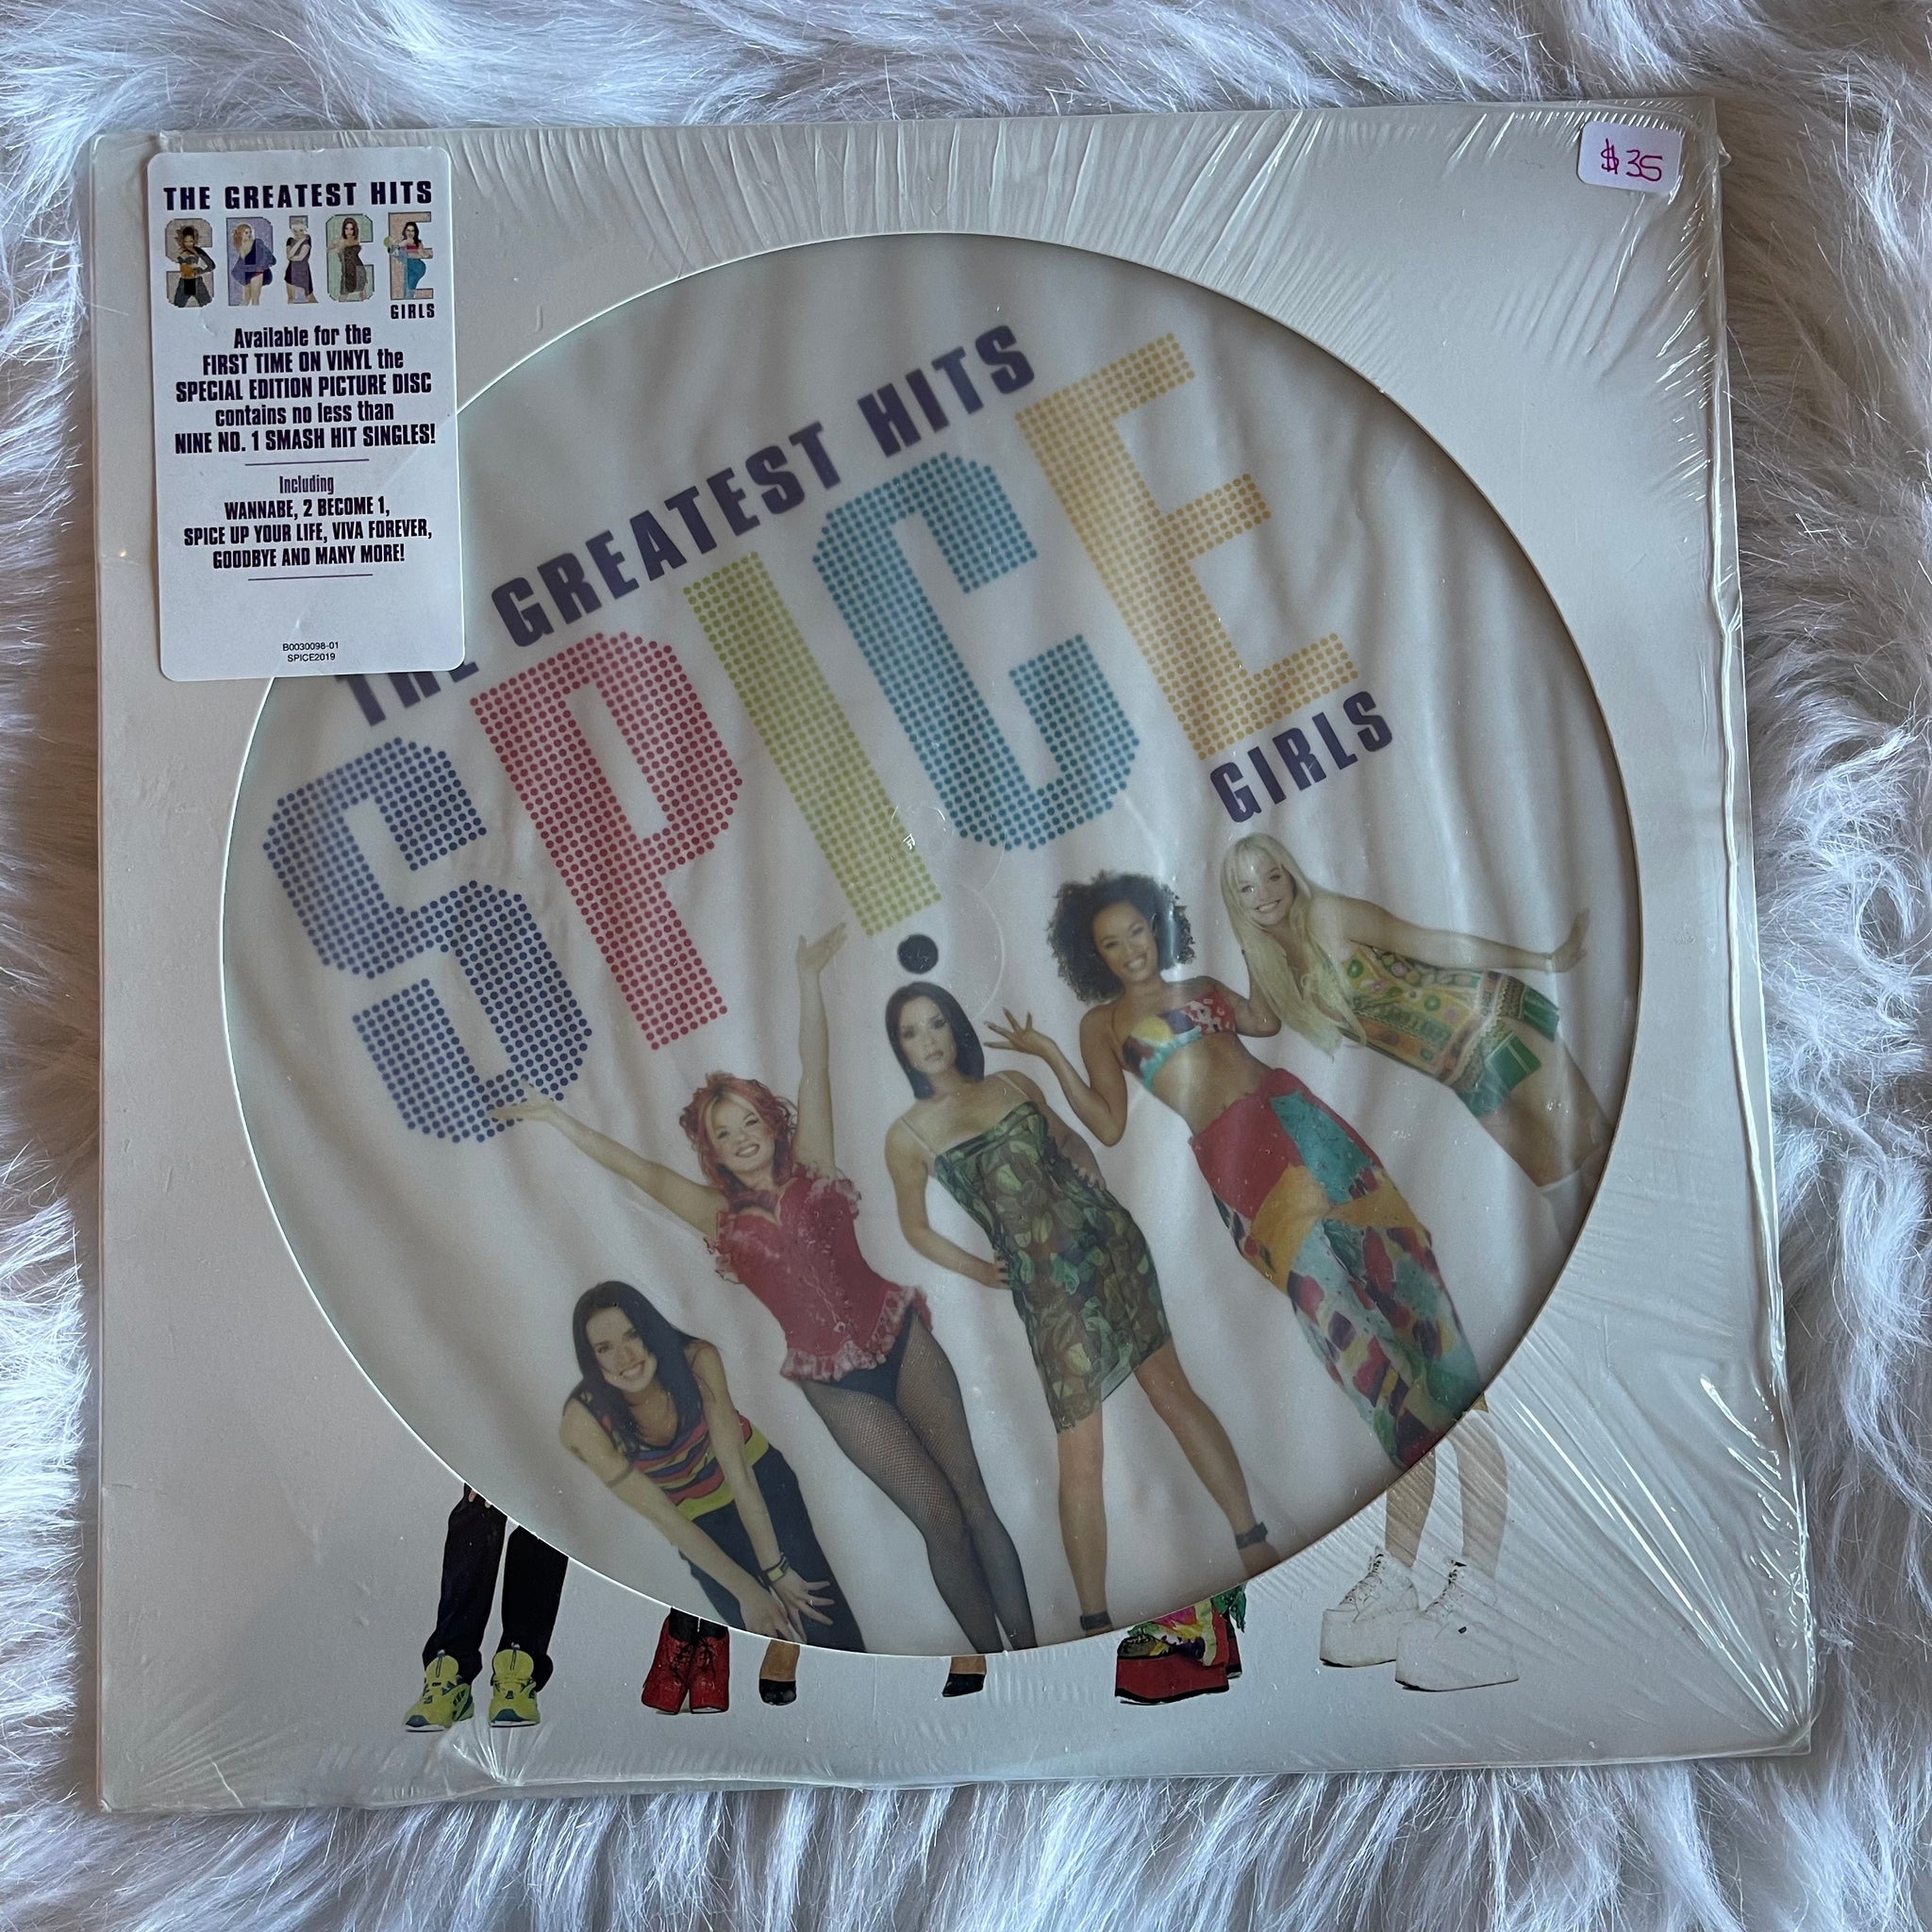 Spice Girls-The Greatest Hits